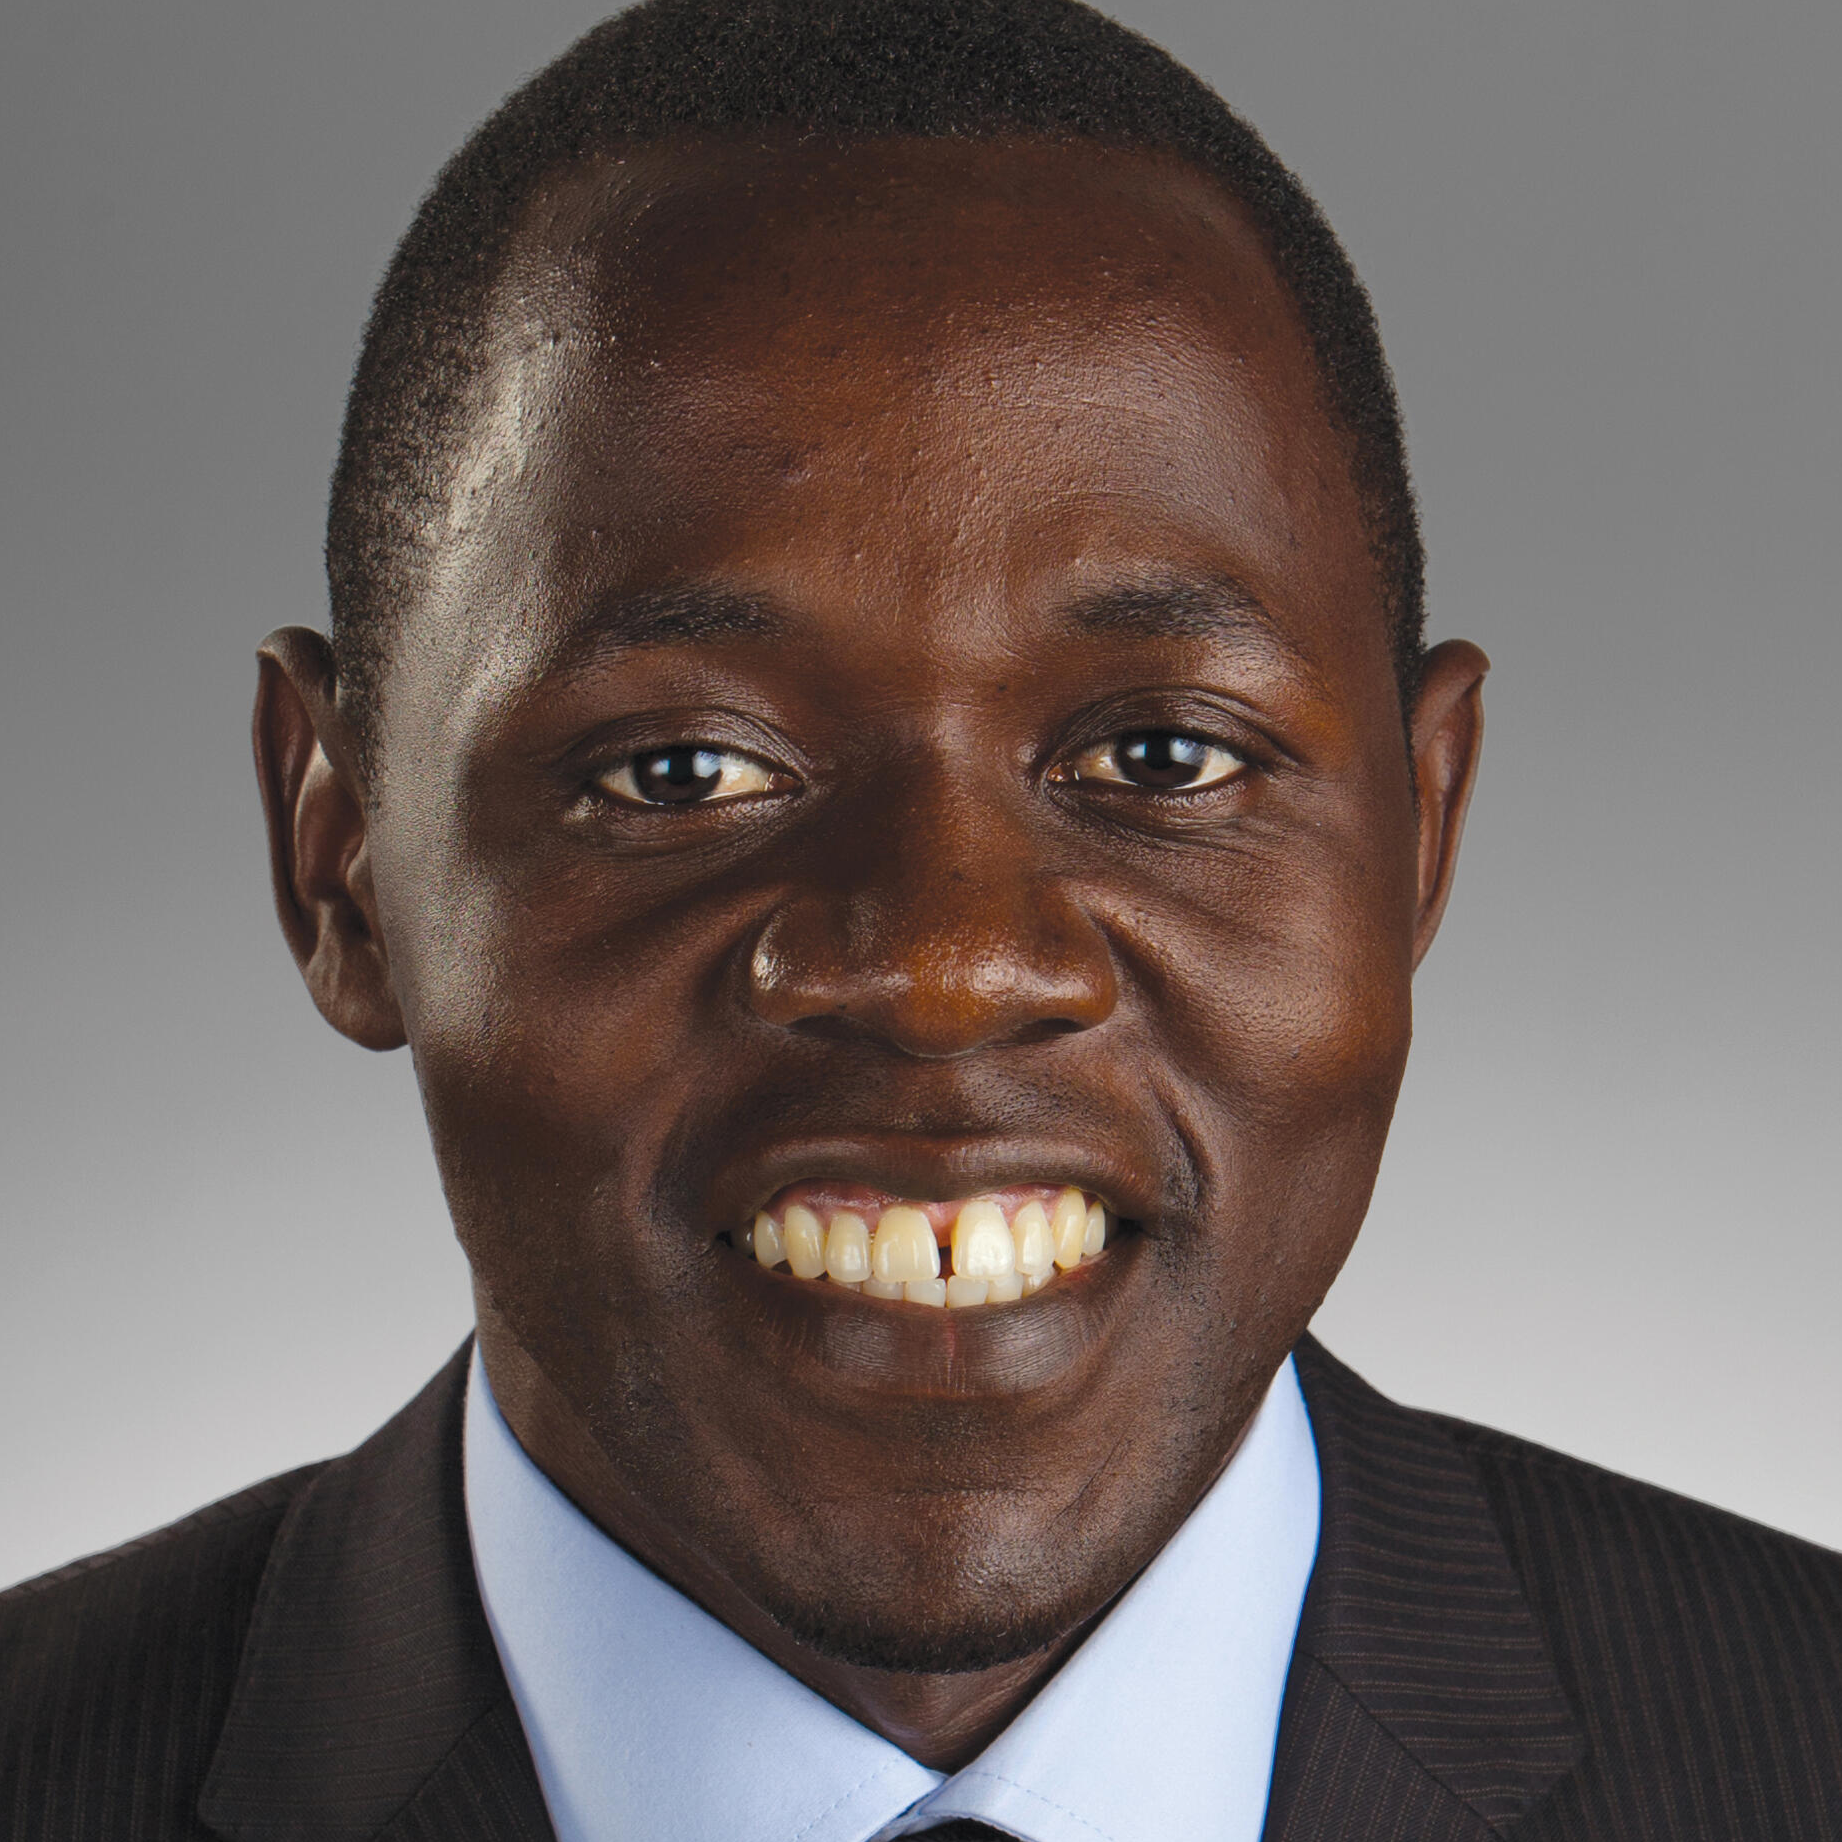 Image of Dr. Godfrey Oduor Wabwire, MD